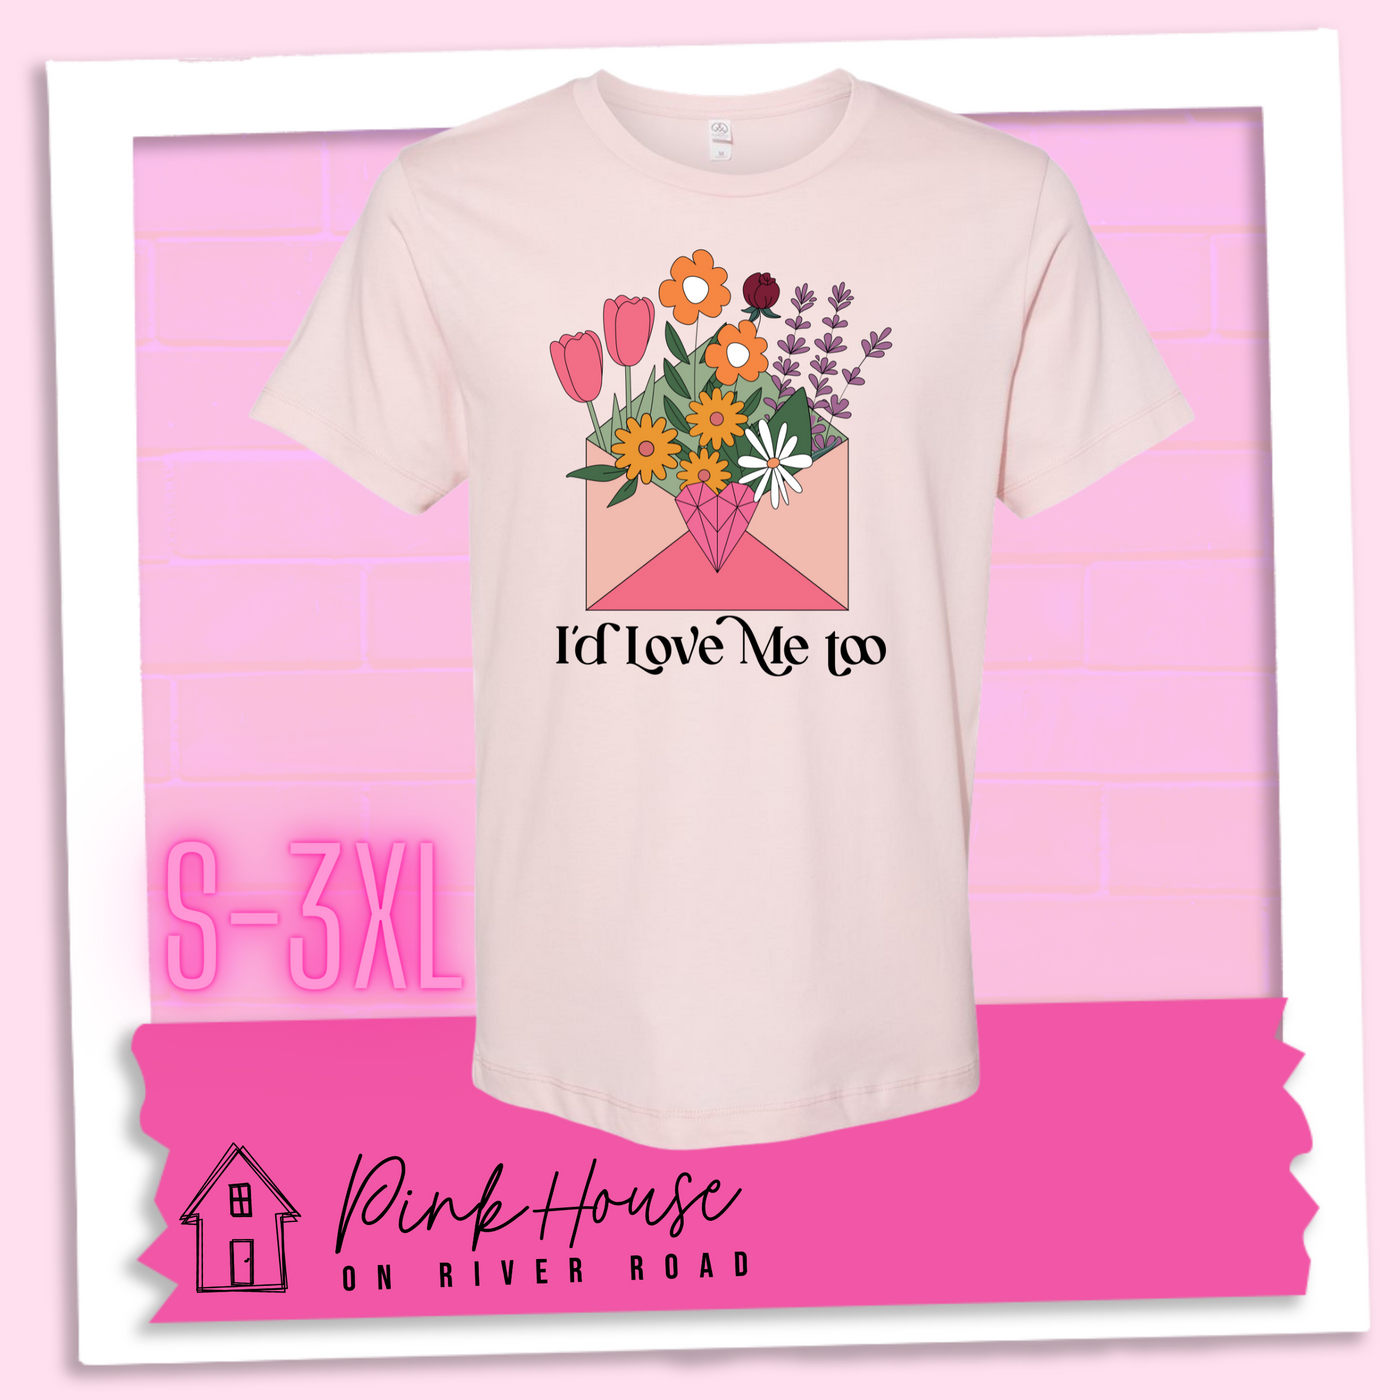 Faded Pink tee with a graphic of a pink envelope filled with different types of flowers and a geometric heart seal. The text underneath reads "I'd Love Me Too"